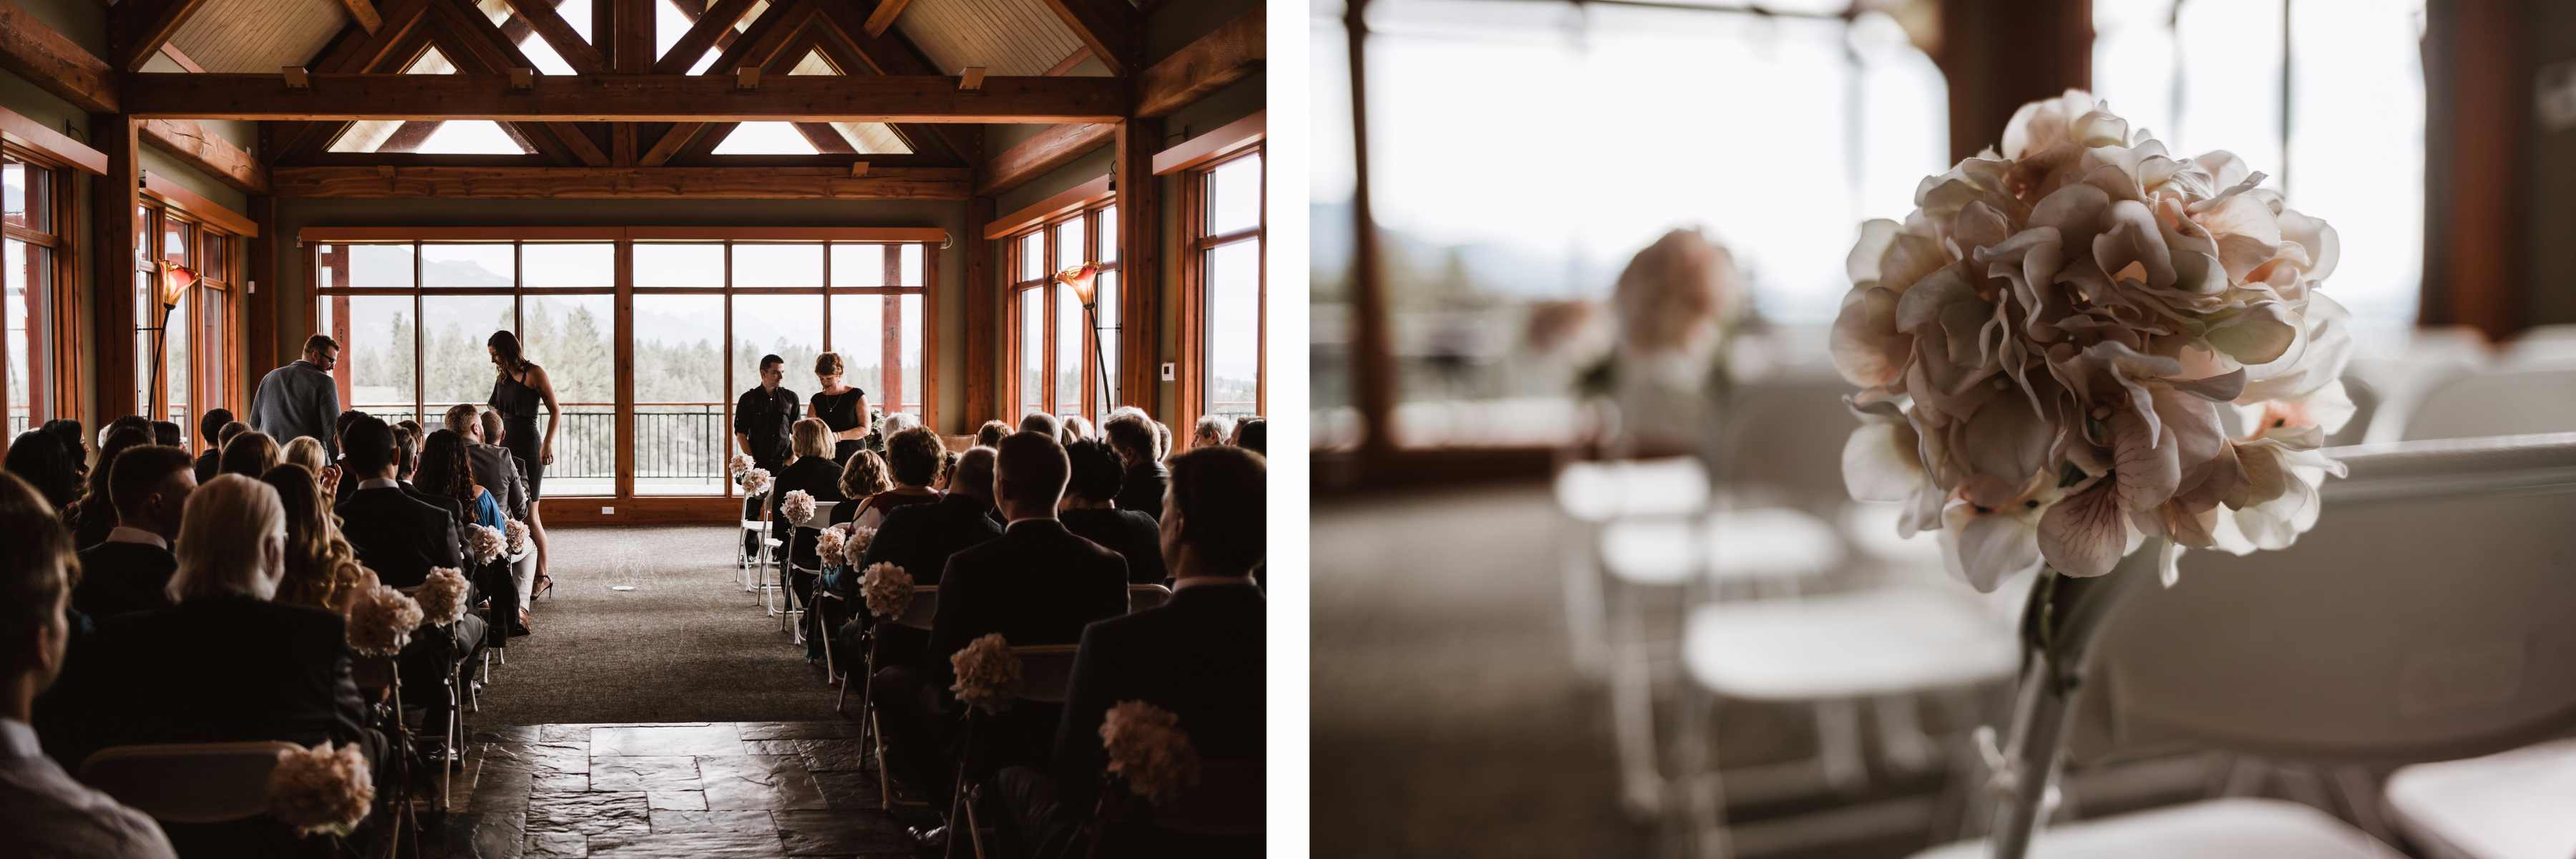 Calgary wedding photographer in Invermere for adventurous mountain destination elopement at Eagle Ranch Golf Resort, British Columbia - Image 10